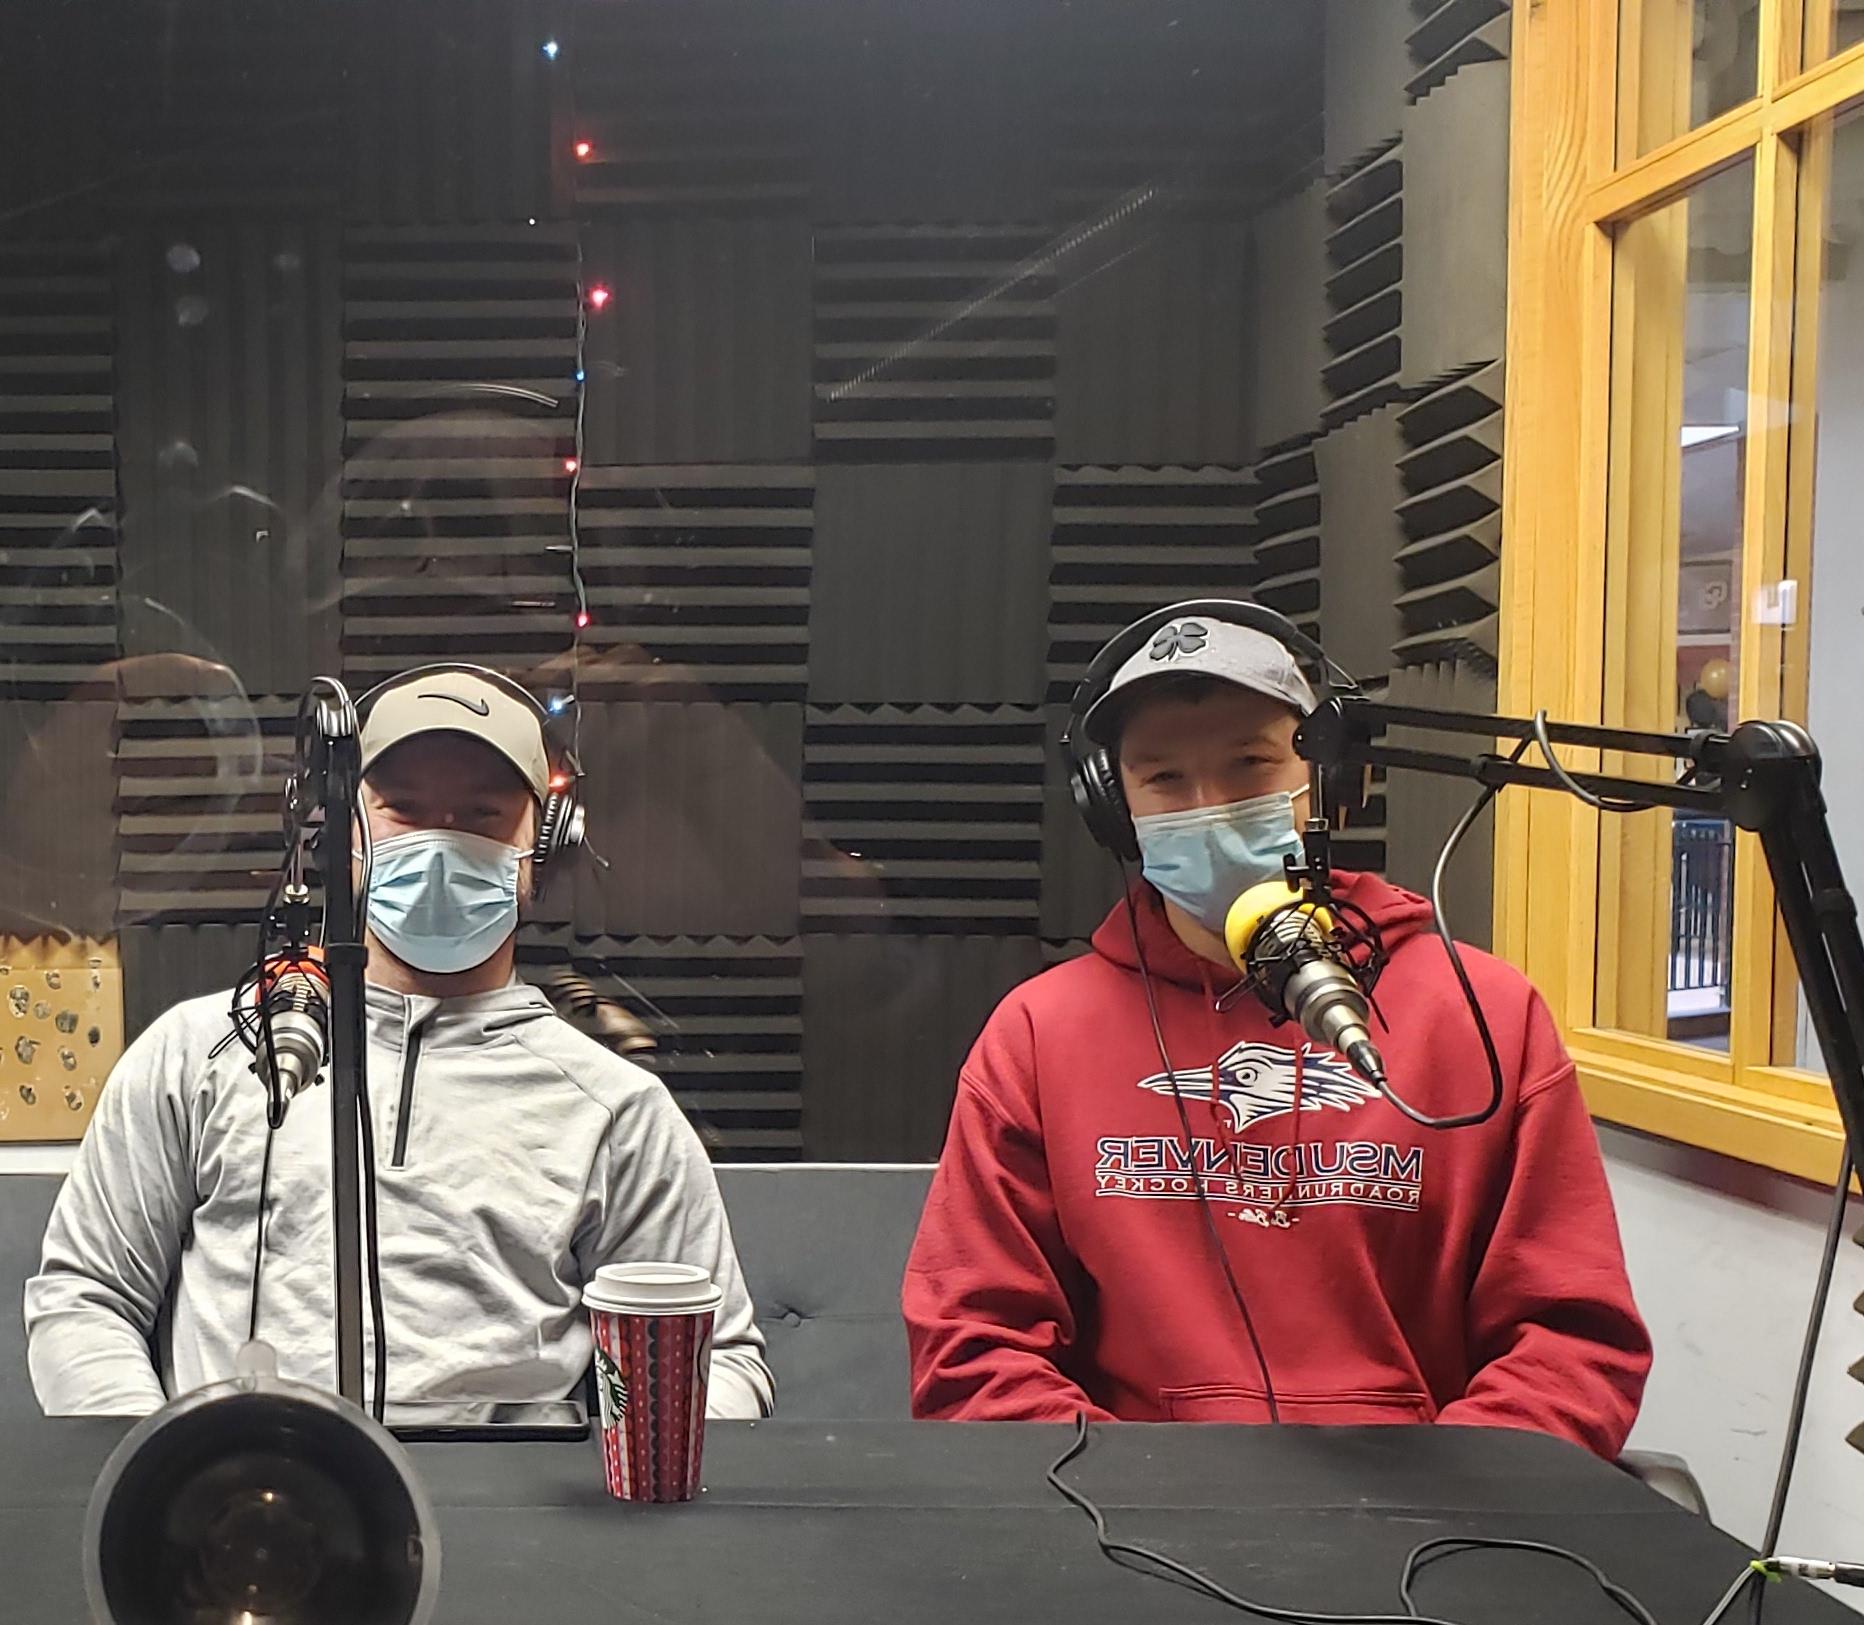 The President and Vice President of the 曲棍球俱乐部 team sitting in the podcast booth with headphones on